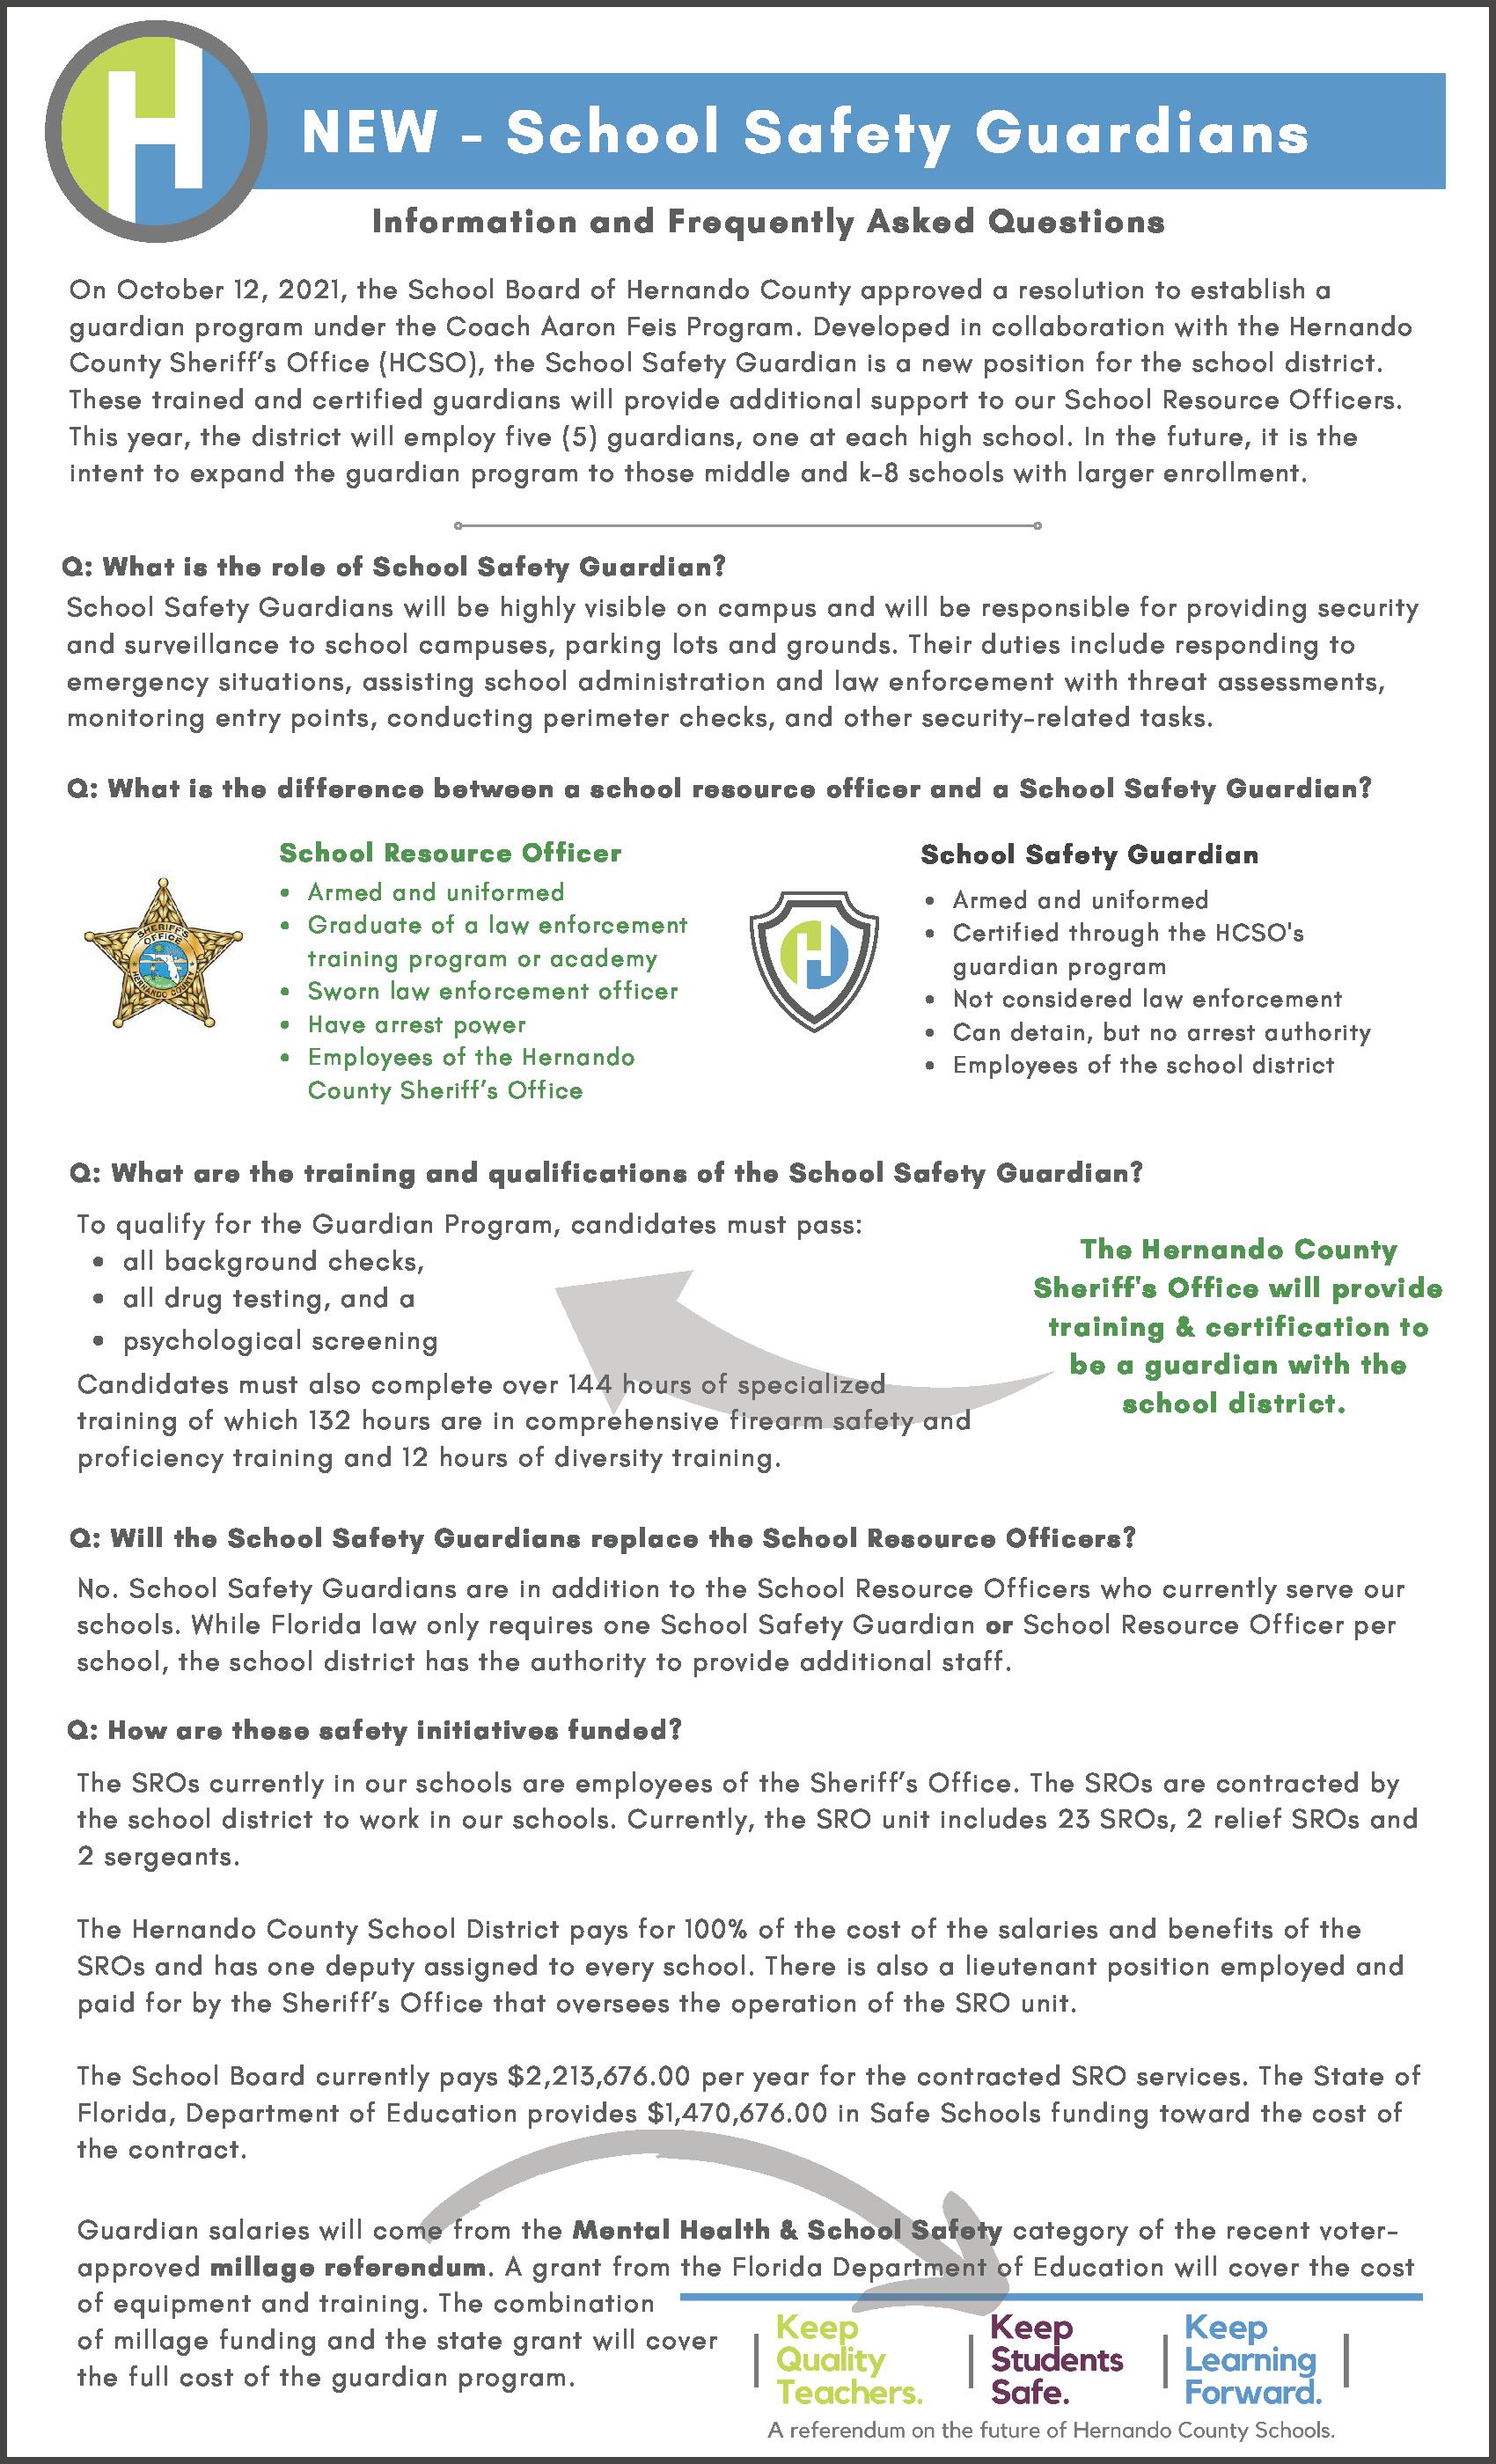 New - School Safety Guardian Information and FAQs